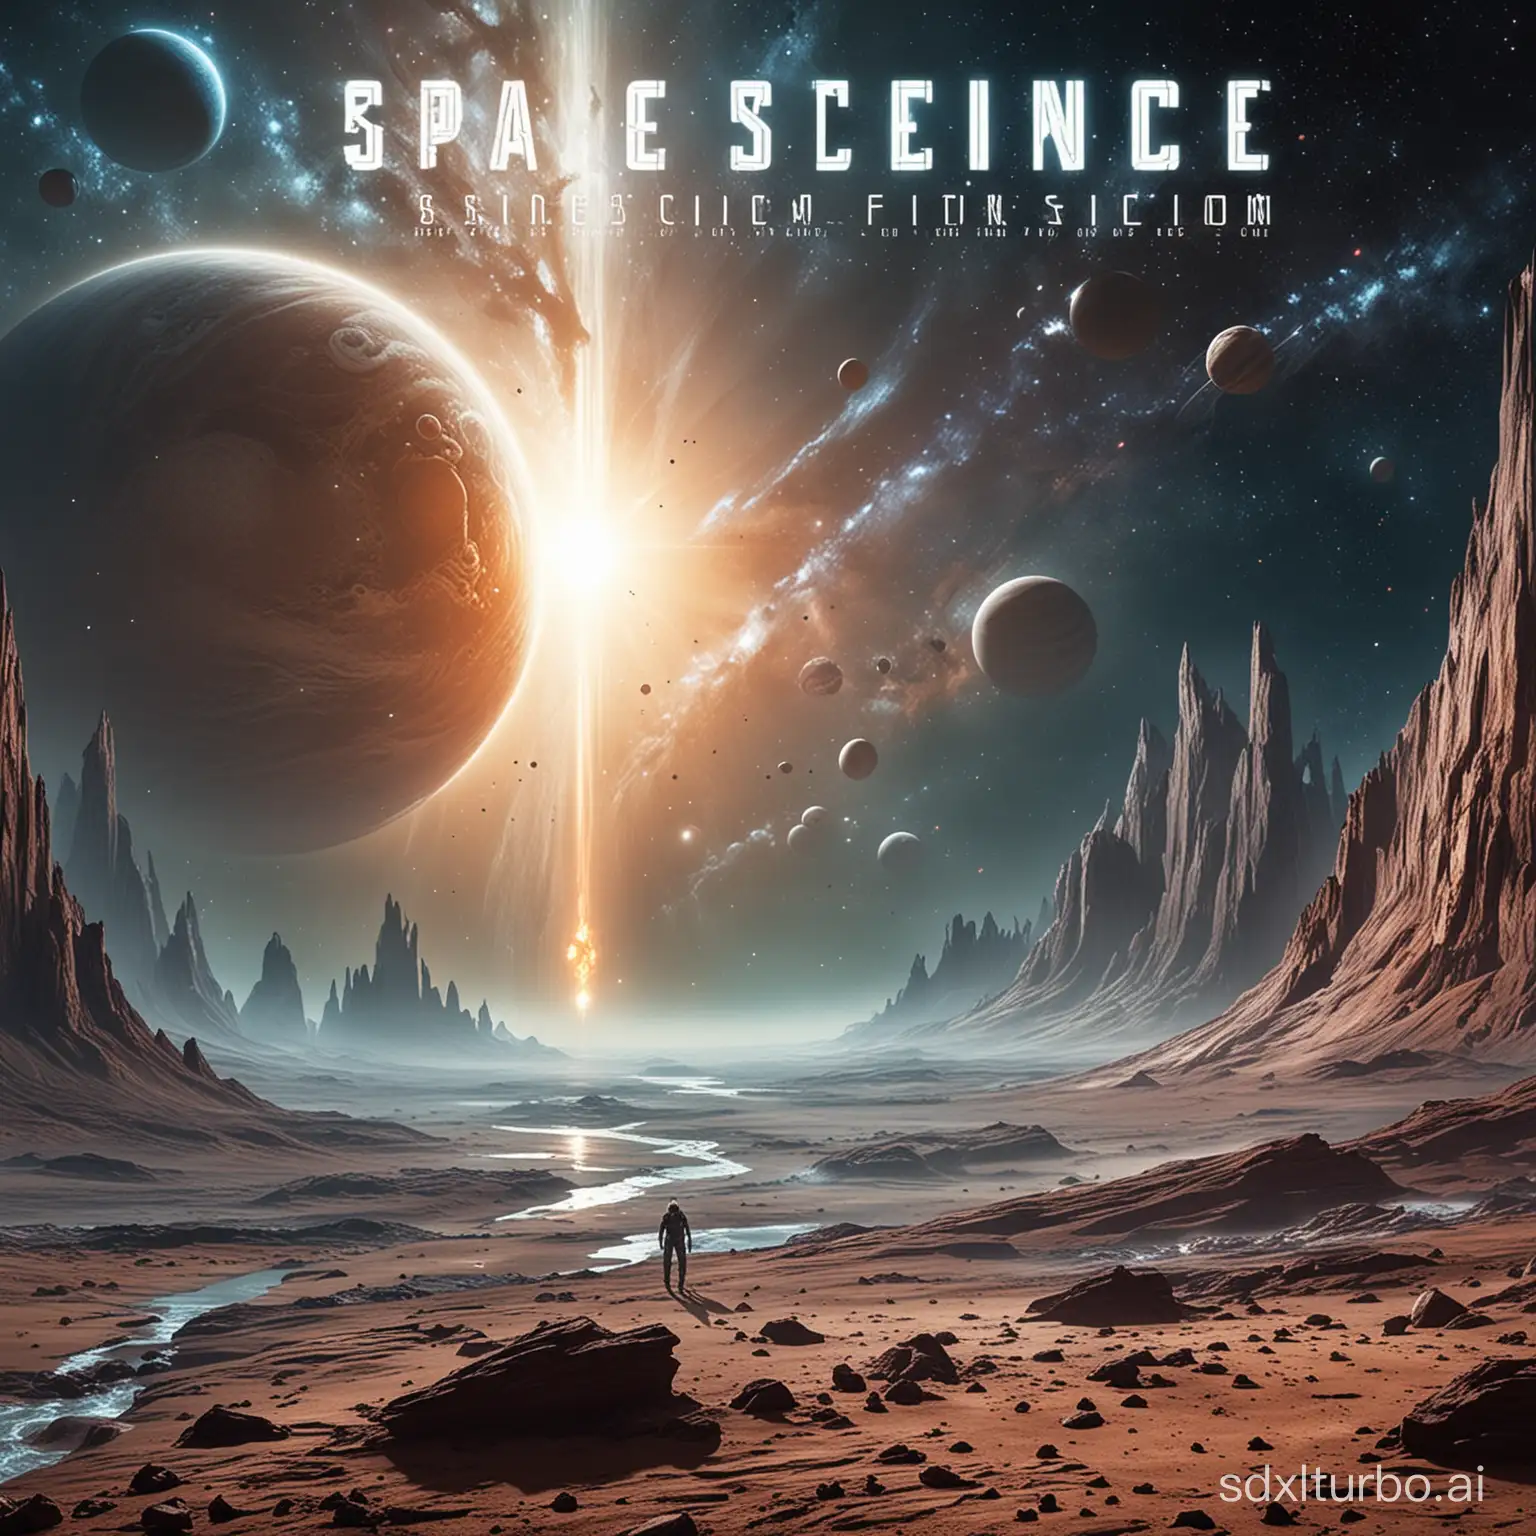 Space science fiction